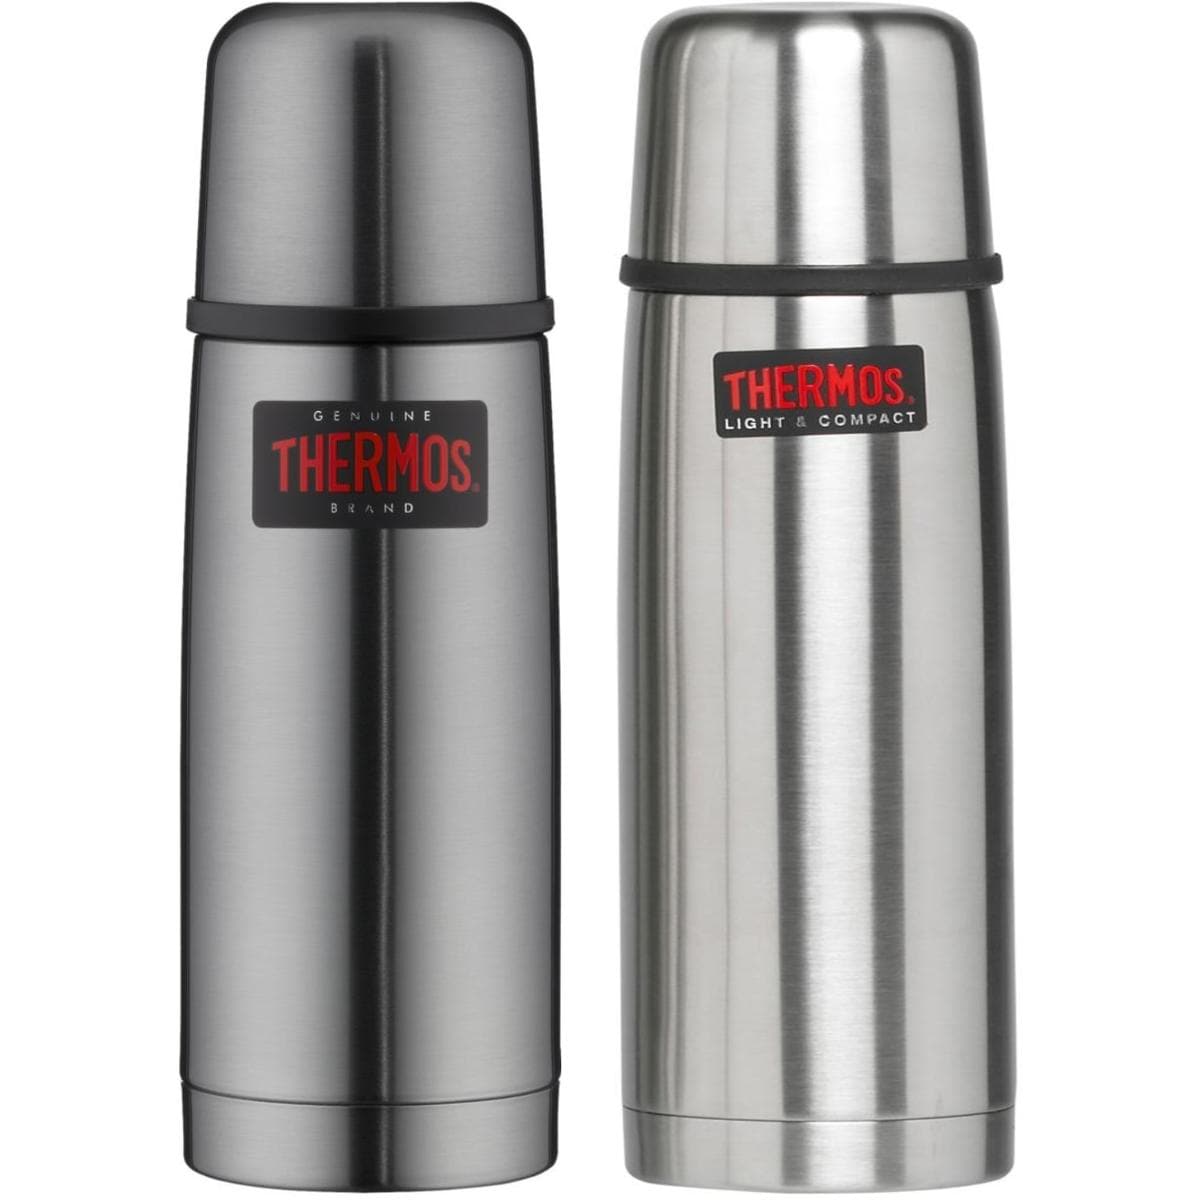 bei Wagner Campingzubehör Camping Light & Thermosflasche Compact Thermos